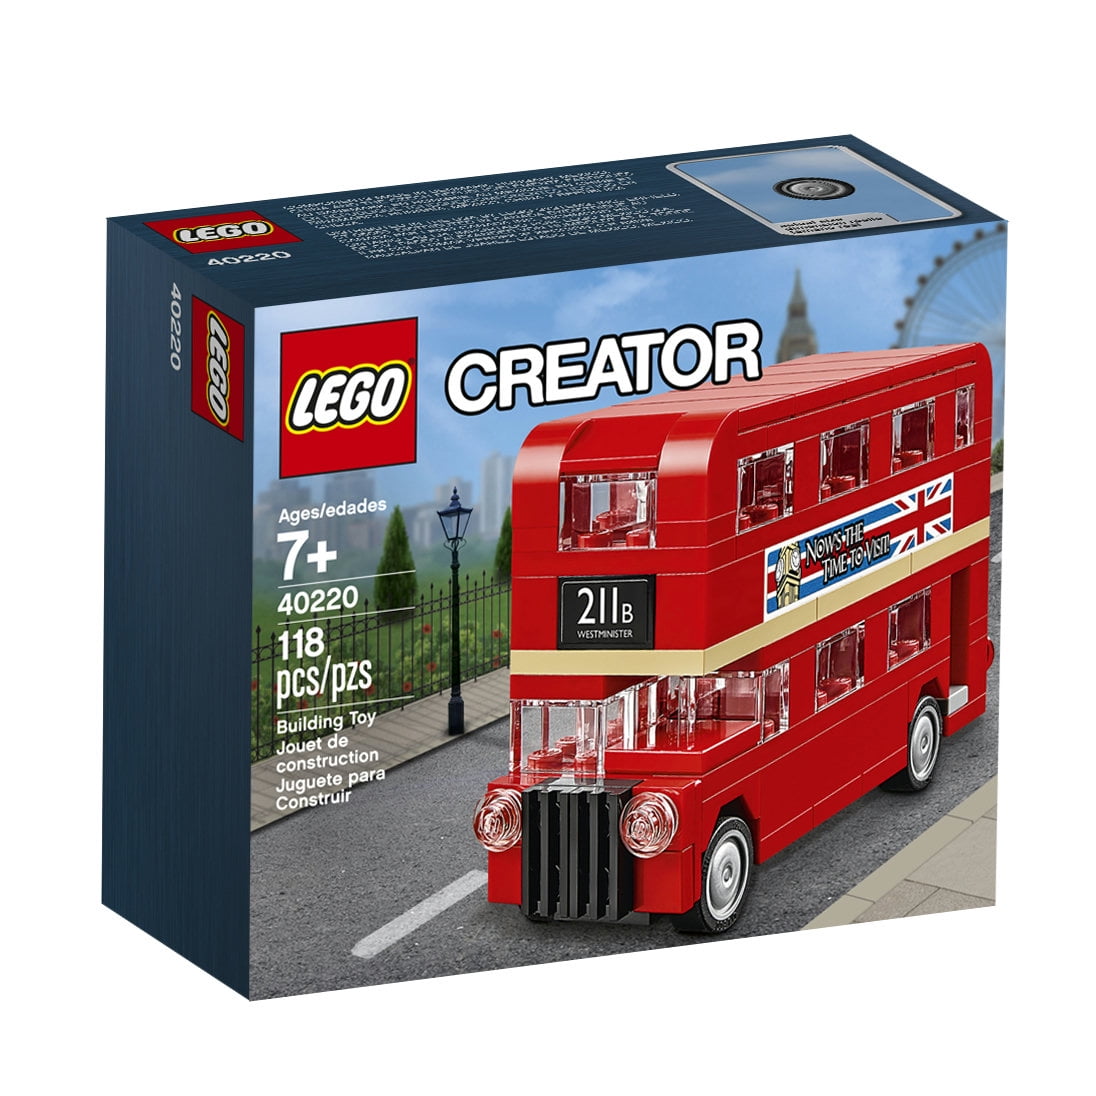 Retro Vintage Hand-crafted London Double Decker Bus Models Gift Home Decor 